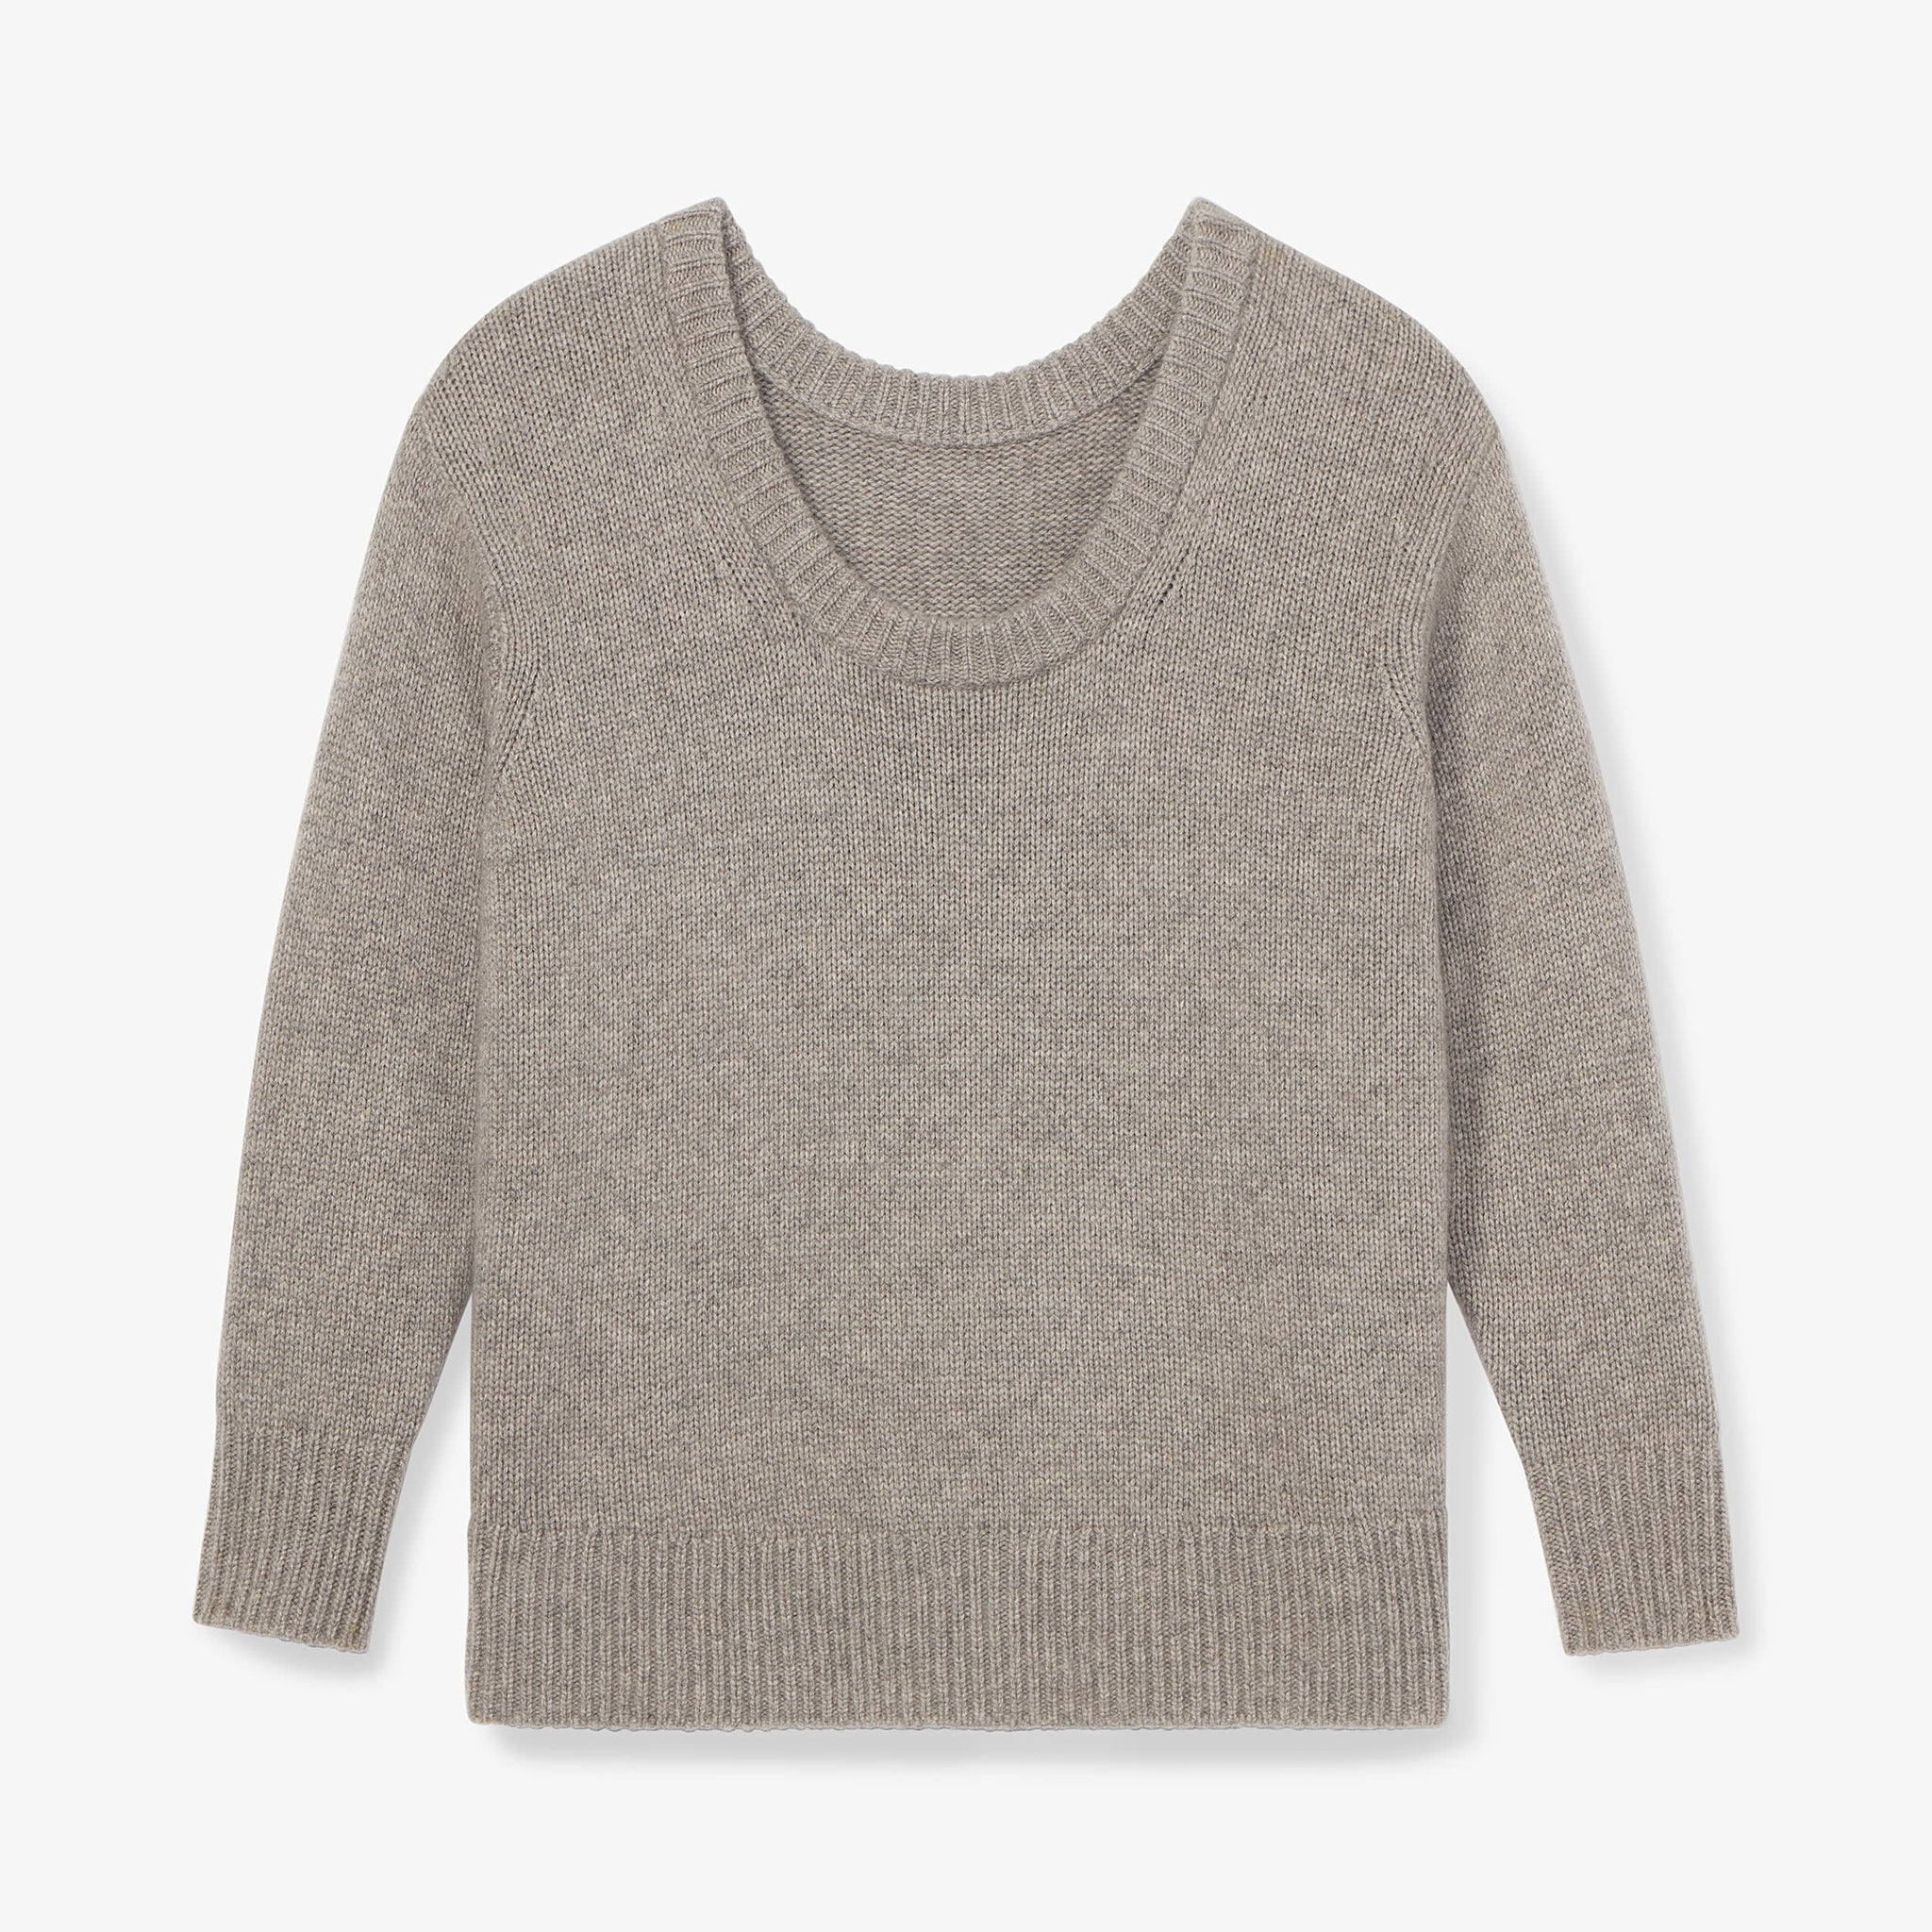 Packshot image of the Theo pullover in stormcloud